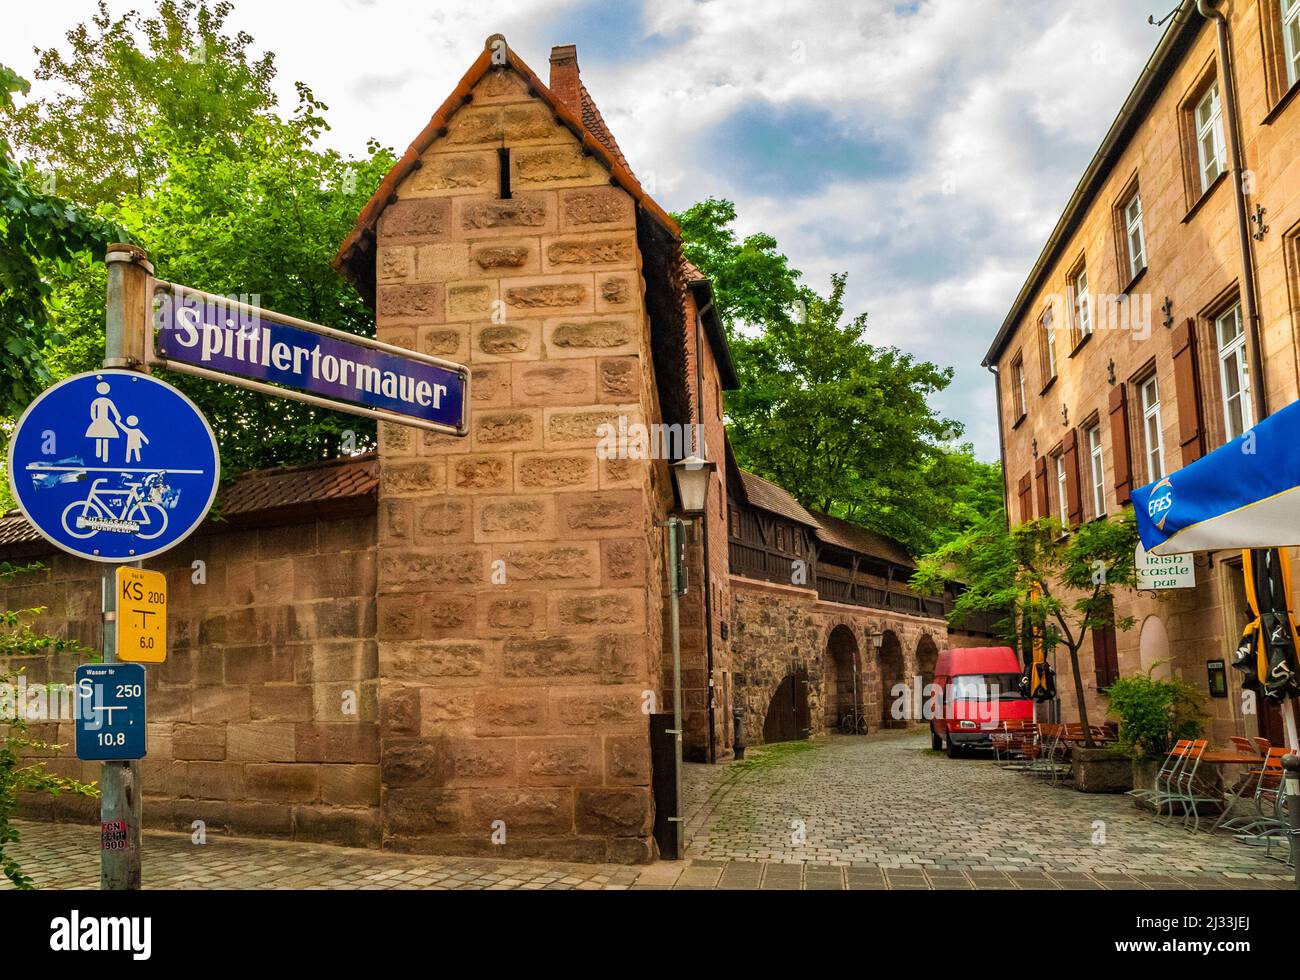 Great view into the road Spittlertormauer with its street sign and the famous medieval fortress walls with walkable battlements, part of the historic... Stock Photo